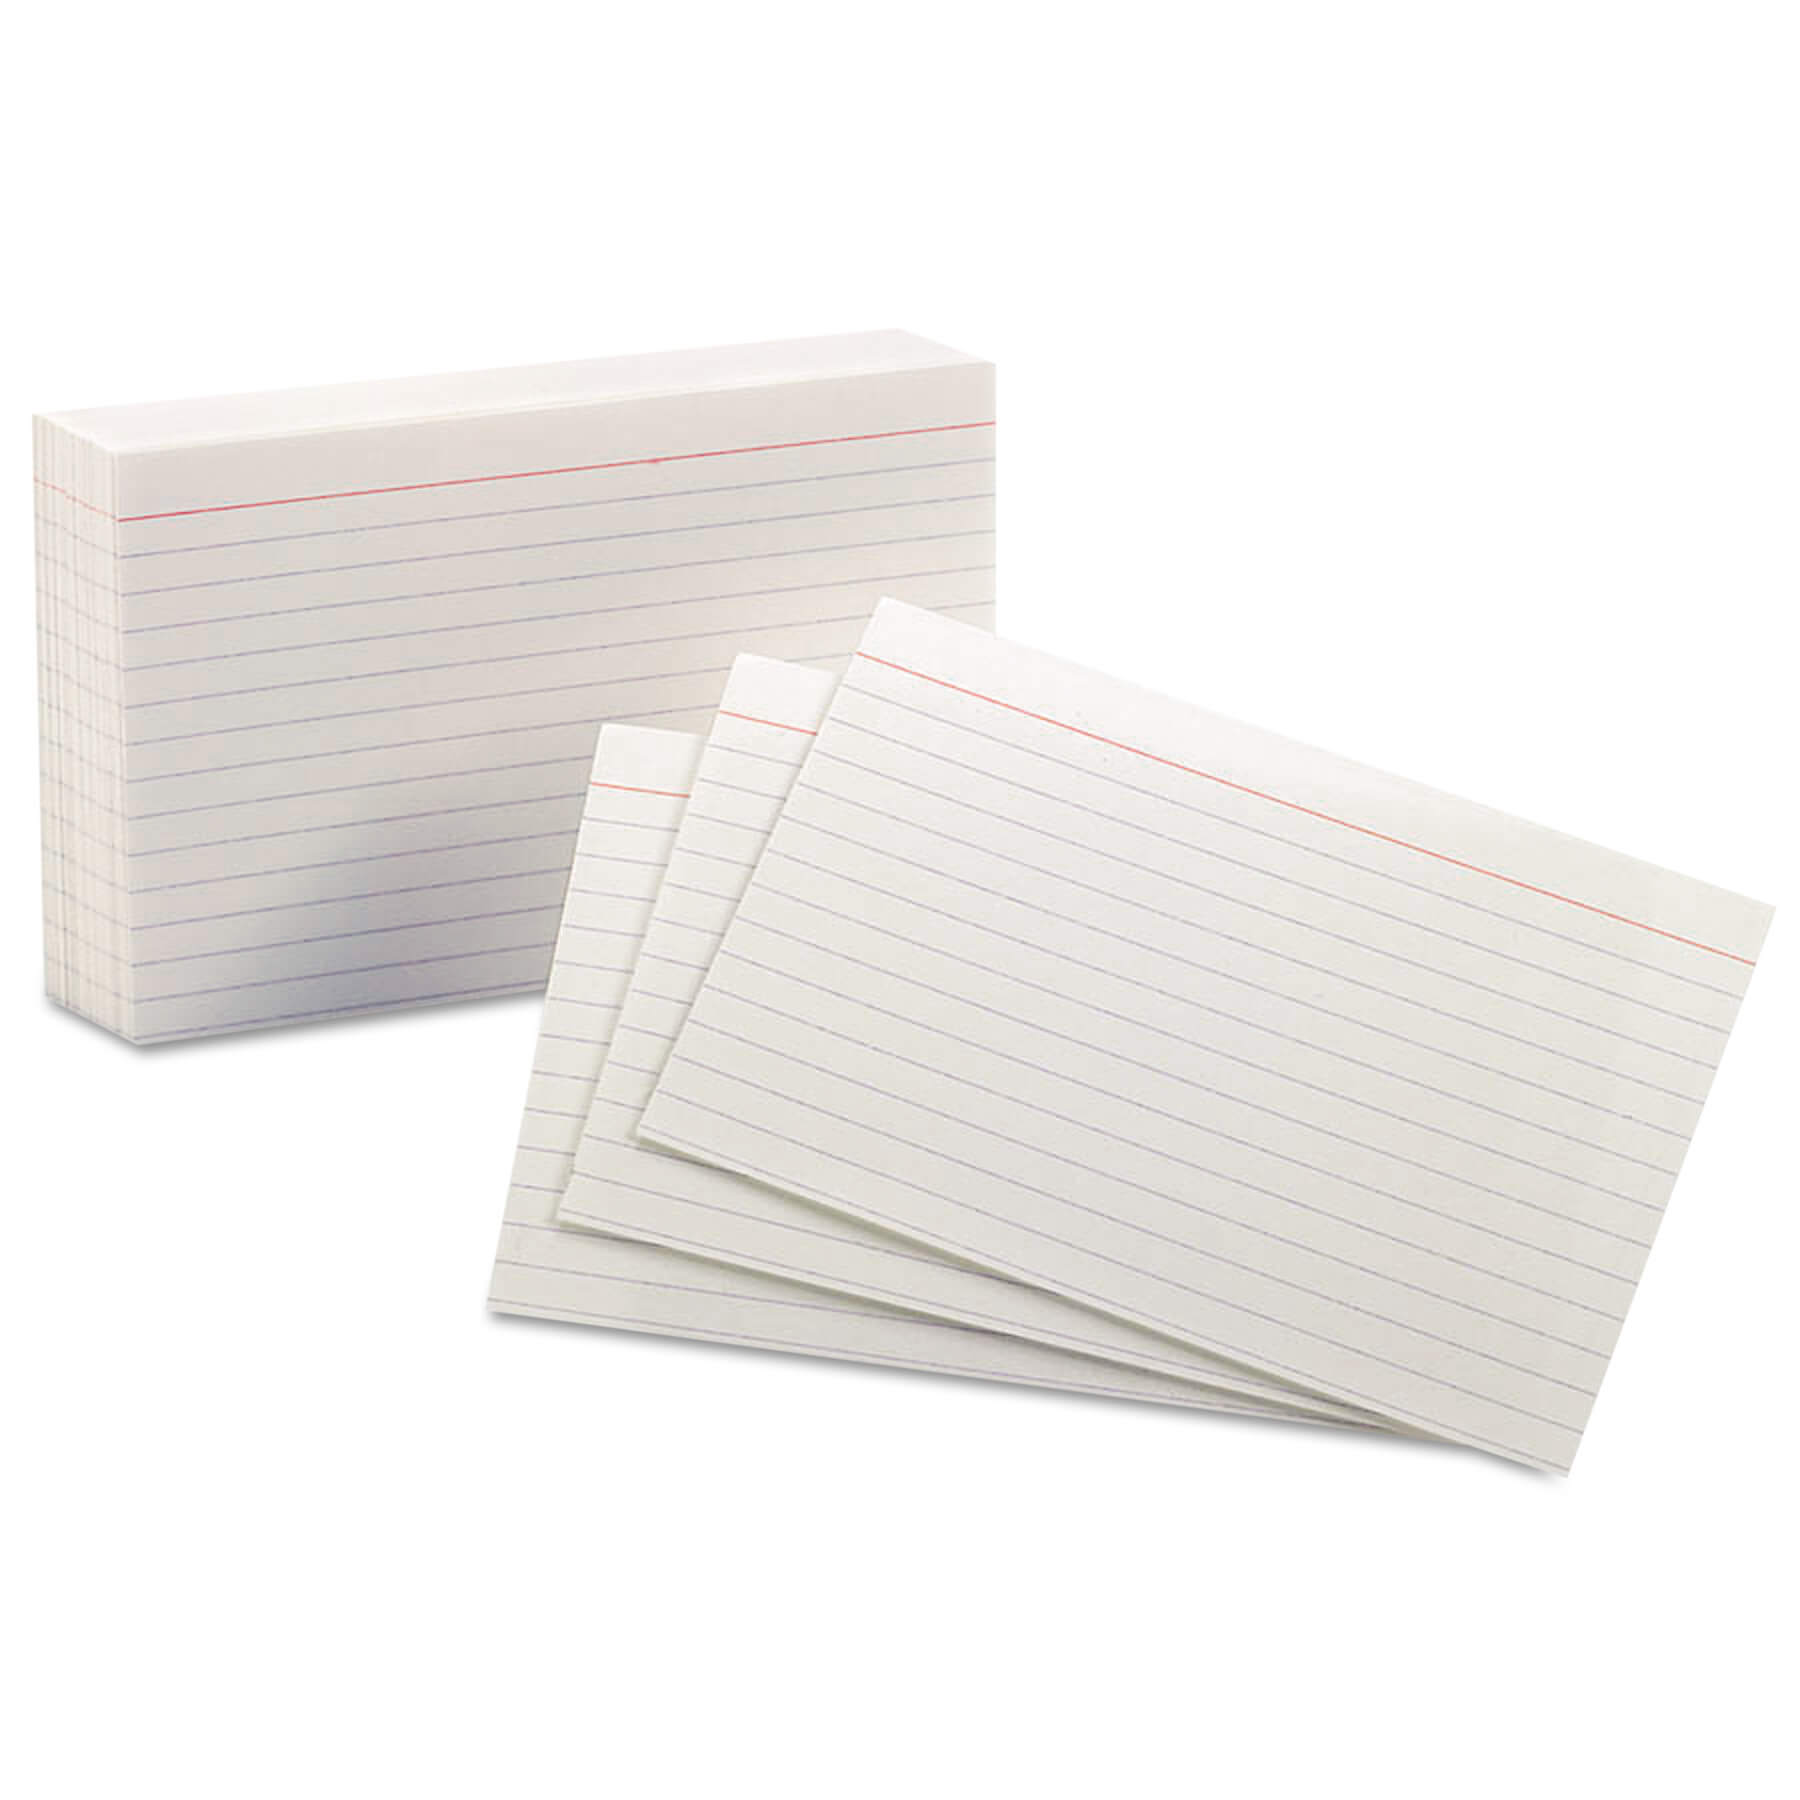 index-card-4x6-major-magdalene-project-with-4x6-note-card-template